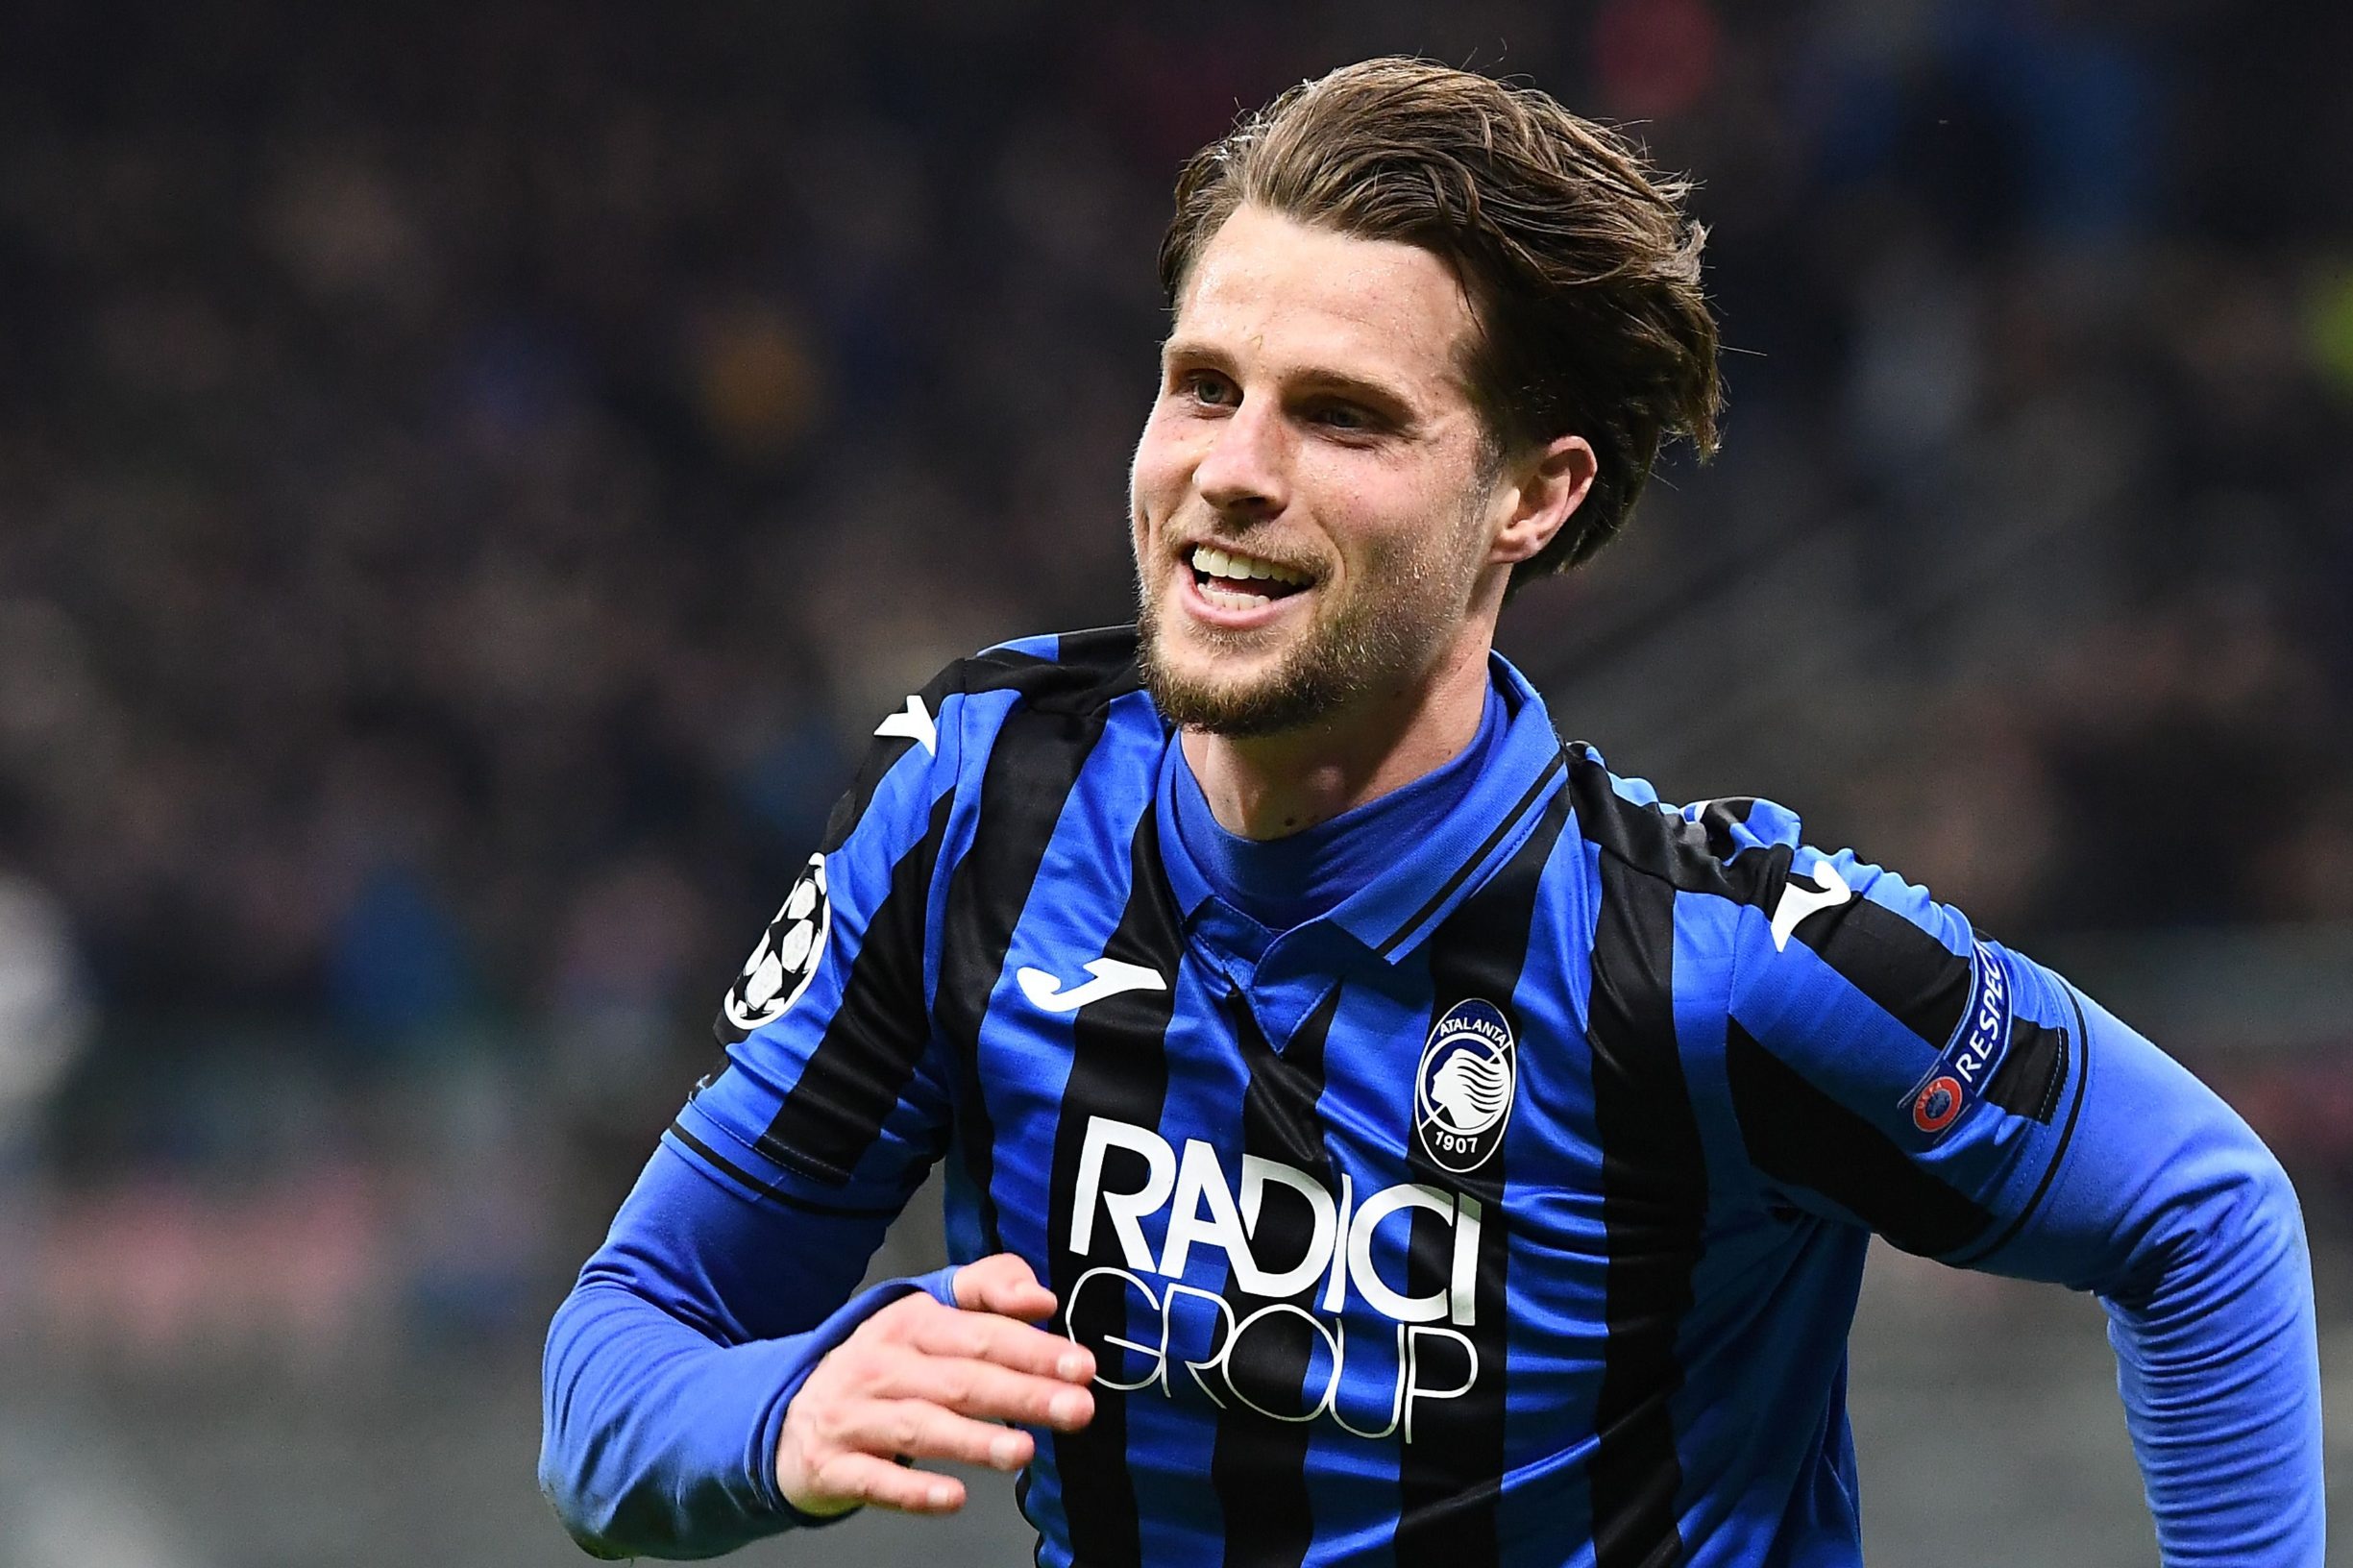 Atalanta's Dutch defender Hans Hateboer celebrates after scoring his second goal during the UEFA Champions League round of 16 first leg football match Atalanta Bergamo vs Valencia on February 19, 2020 at the San Siro stadium in Milan. (Photo by Vincenzo PINTO / AFP)